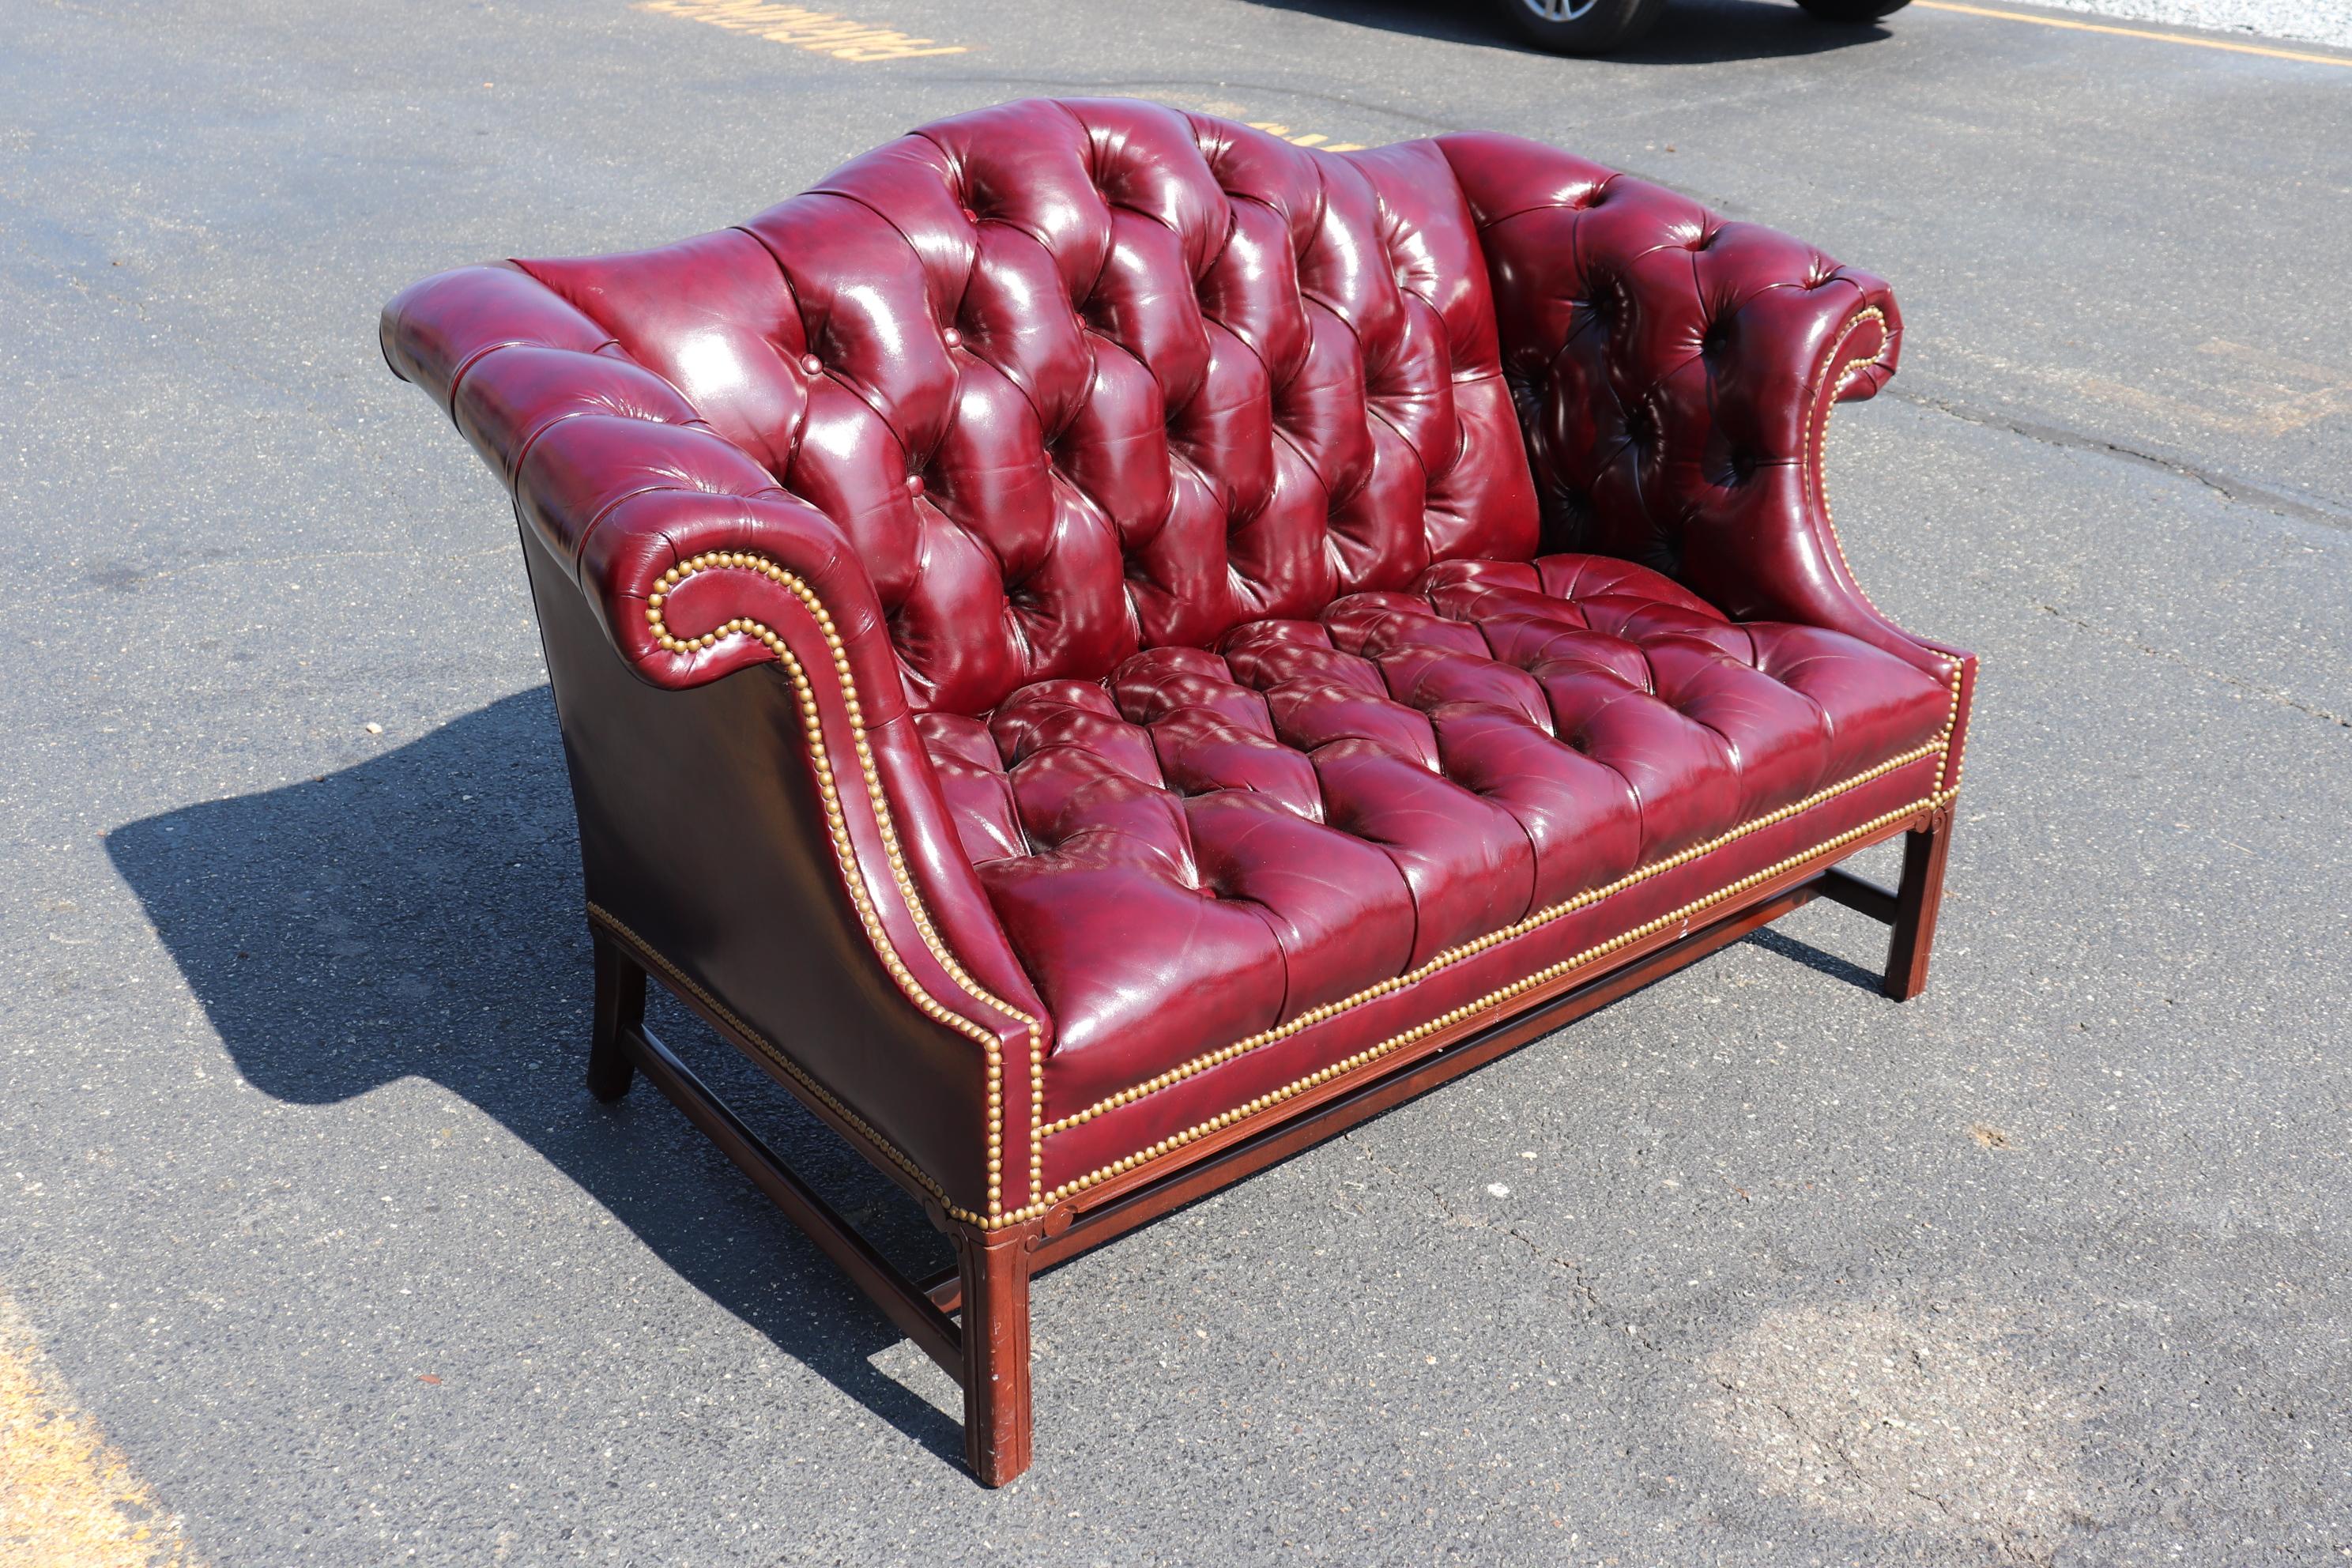 This is a stunning burgundy leather Hancock & Moore loveseat or settee. The leather is in beautiful original condition and measures 60 inches wide x 33 deep x 36 tall and the seat height is 16.5 inches tall. There are no buttons missing and the